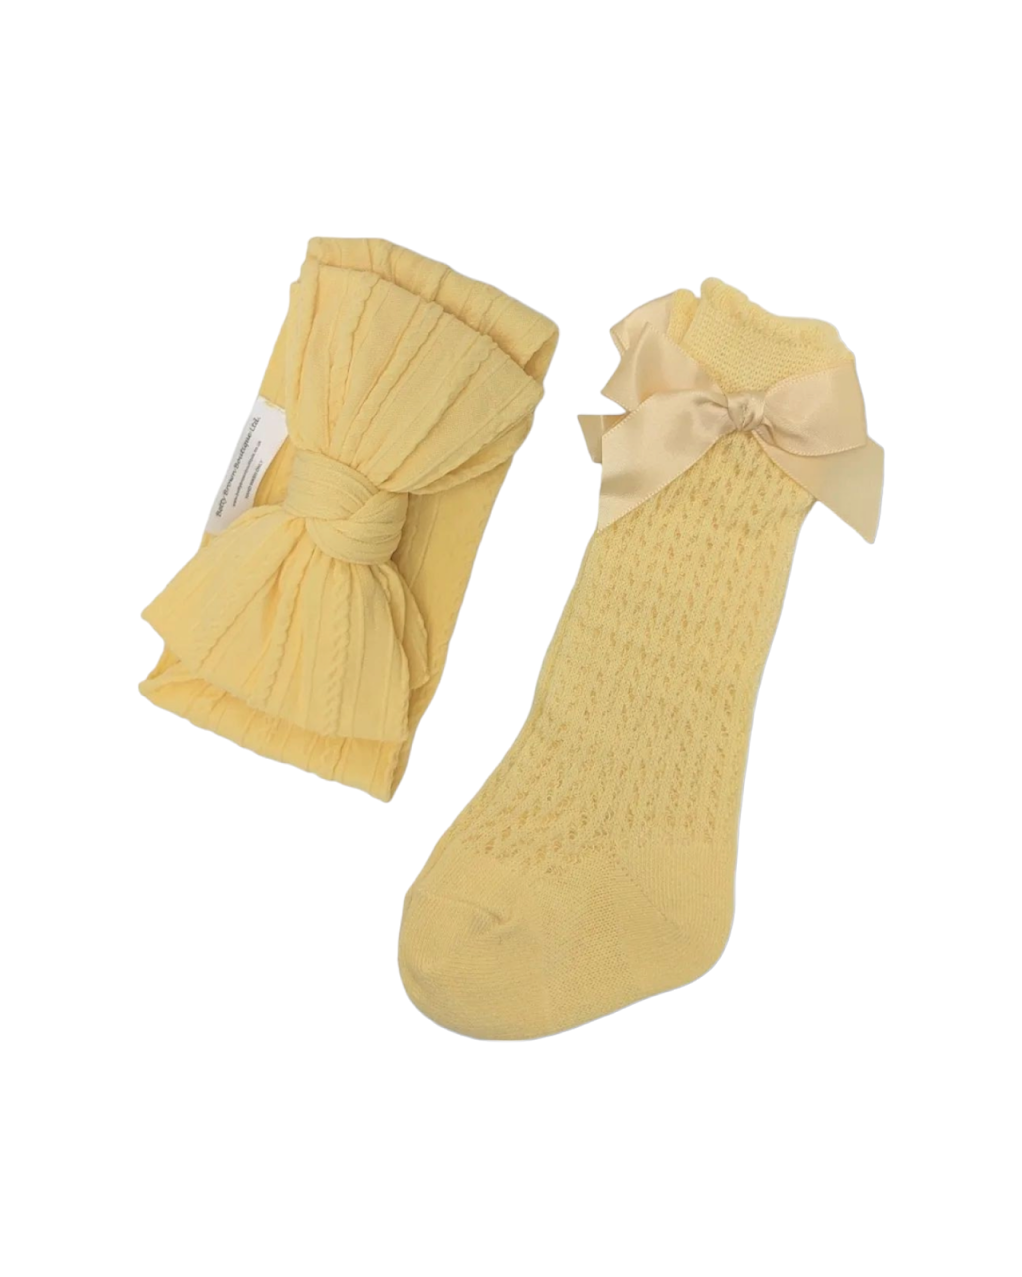 Our Daffodil Yellow Larger Headwrap & Open Patterned Knee High Socks Set - Betty Brown Boutique Ltd